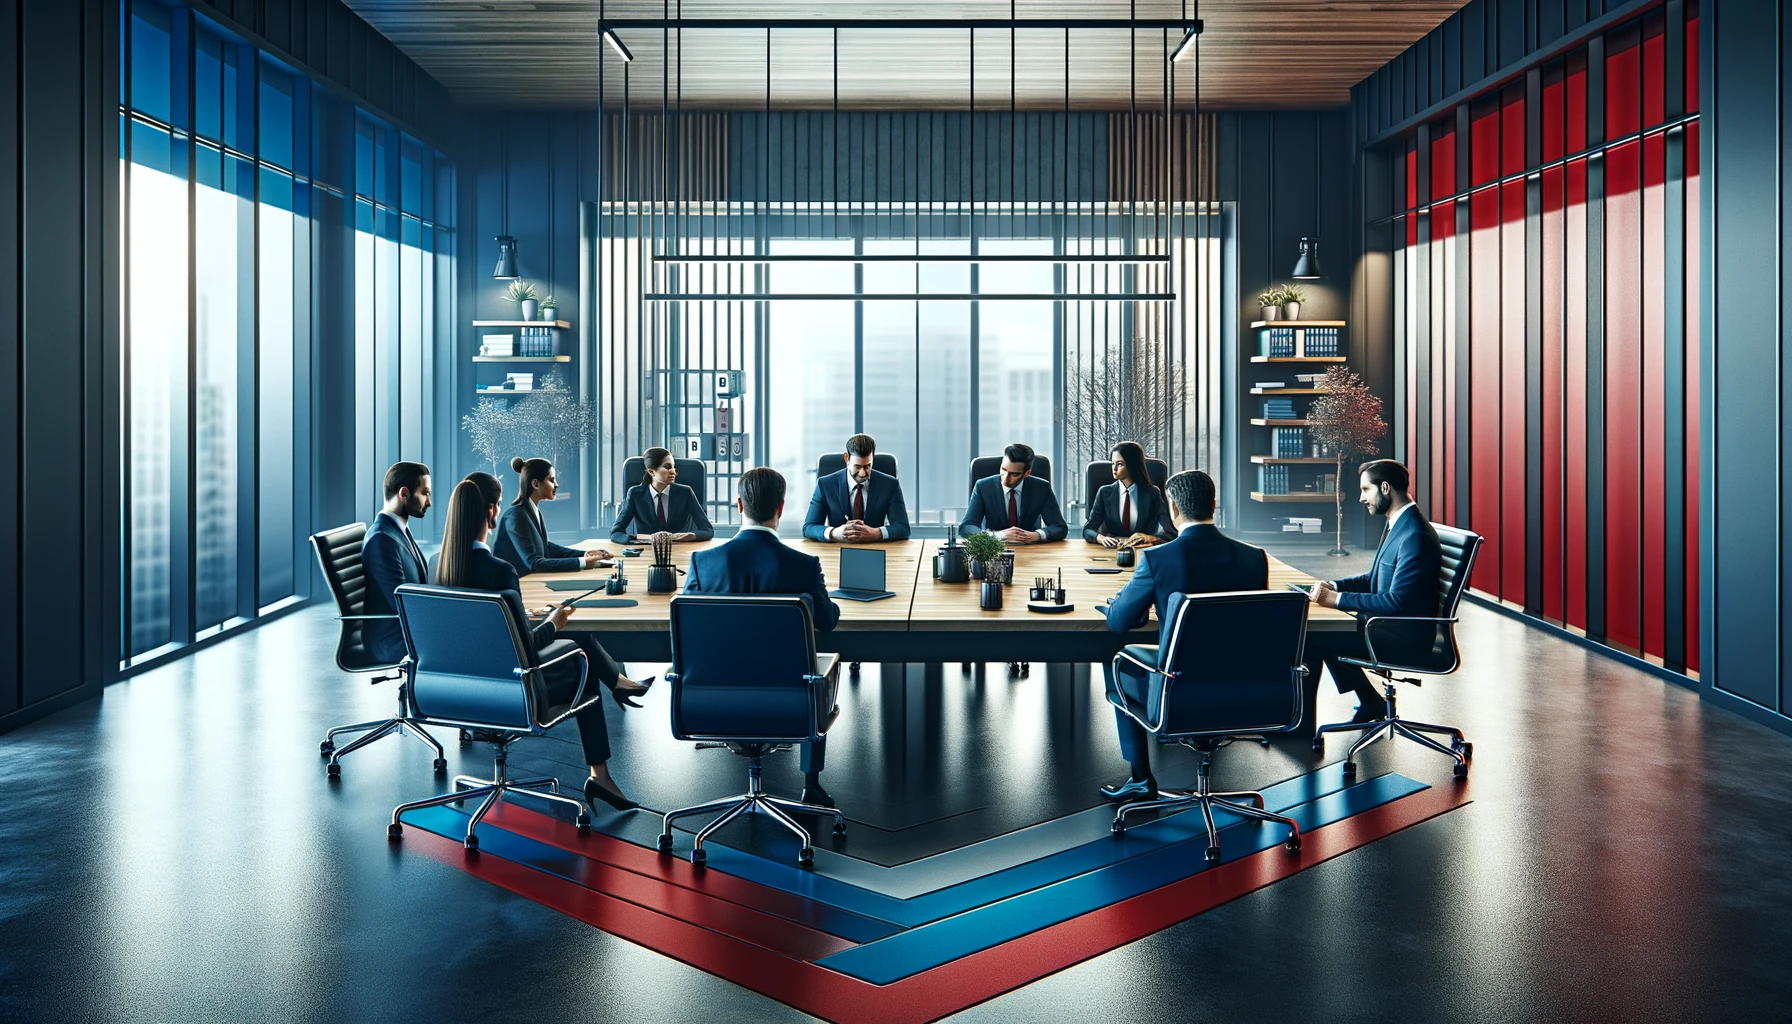 A realistic photo in a widescreen aspect ratio depicting the office of a CFO of a distribution company, focusing on a meeting with the financial team